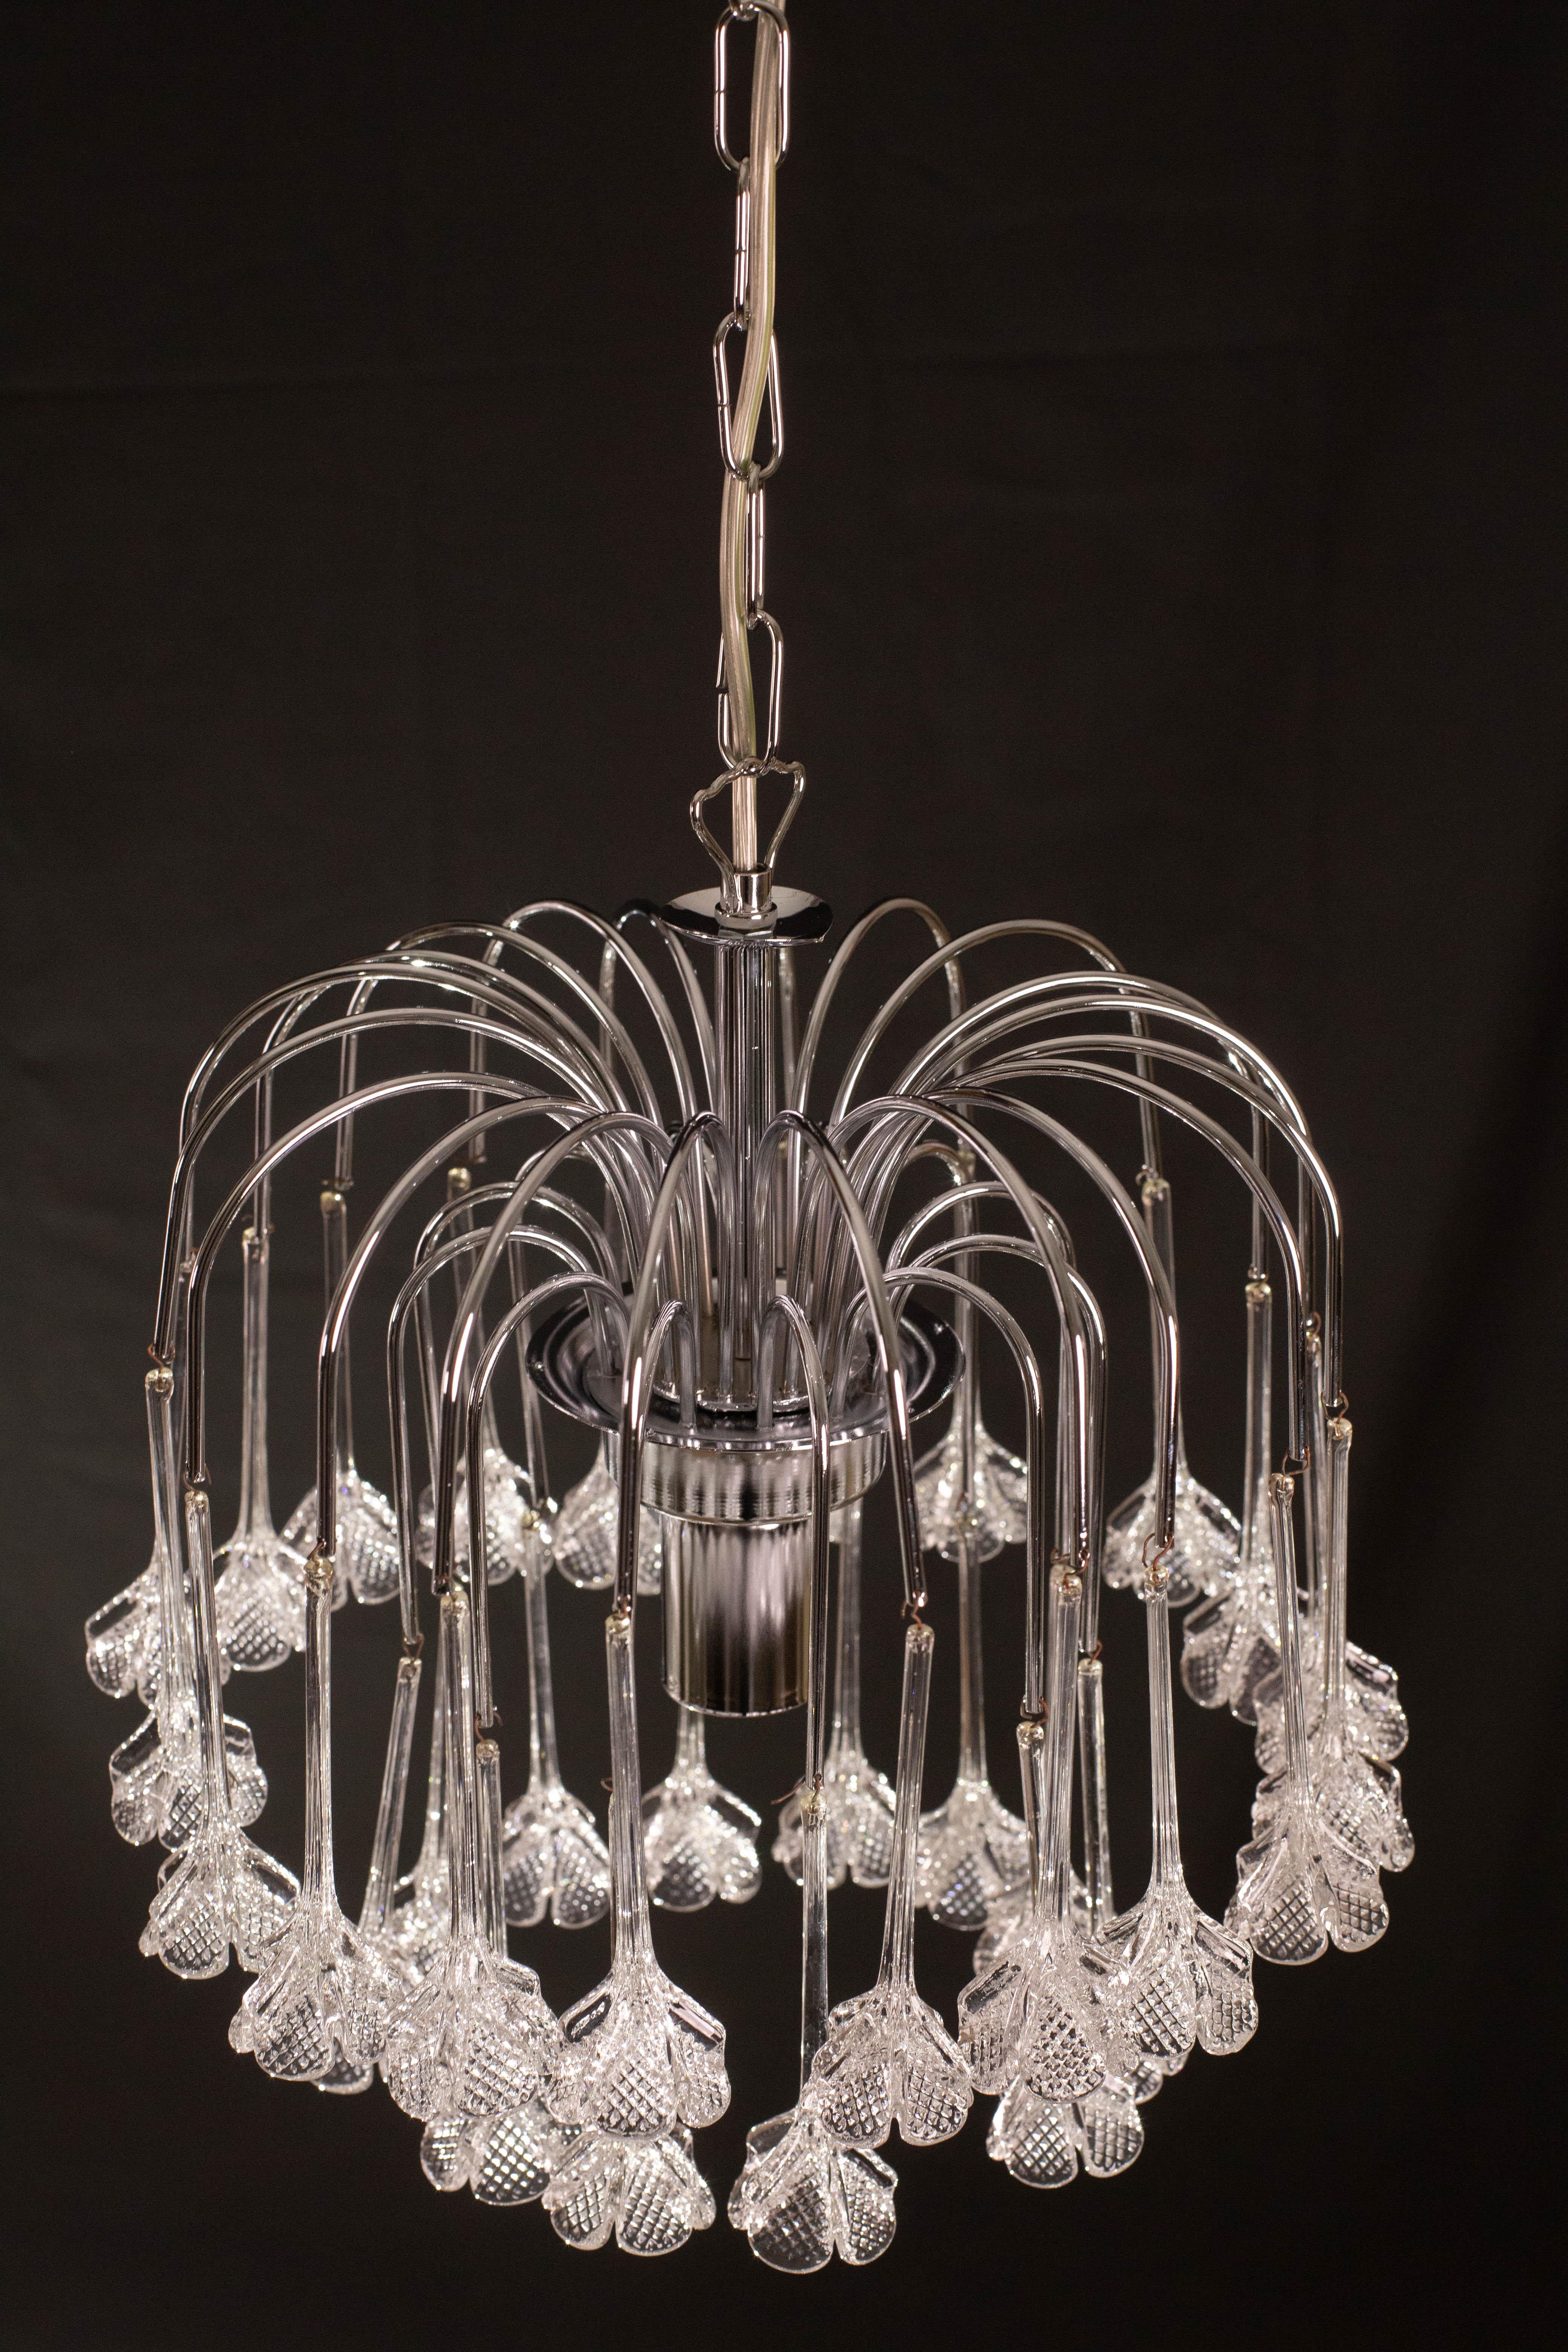 Set of 2 Julia Roberts, Vintage White Murano Chandelier, 1980s For Sale 8